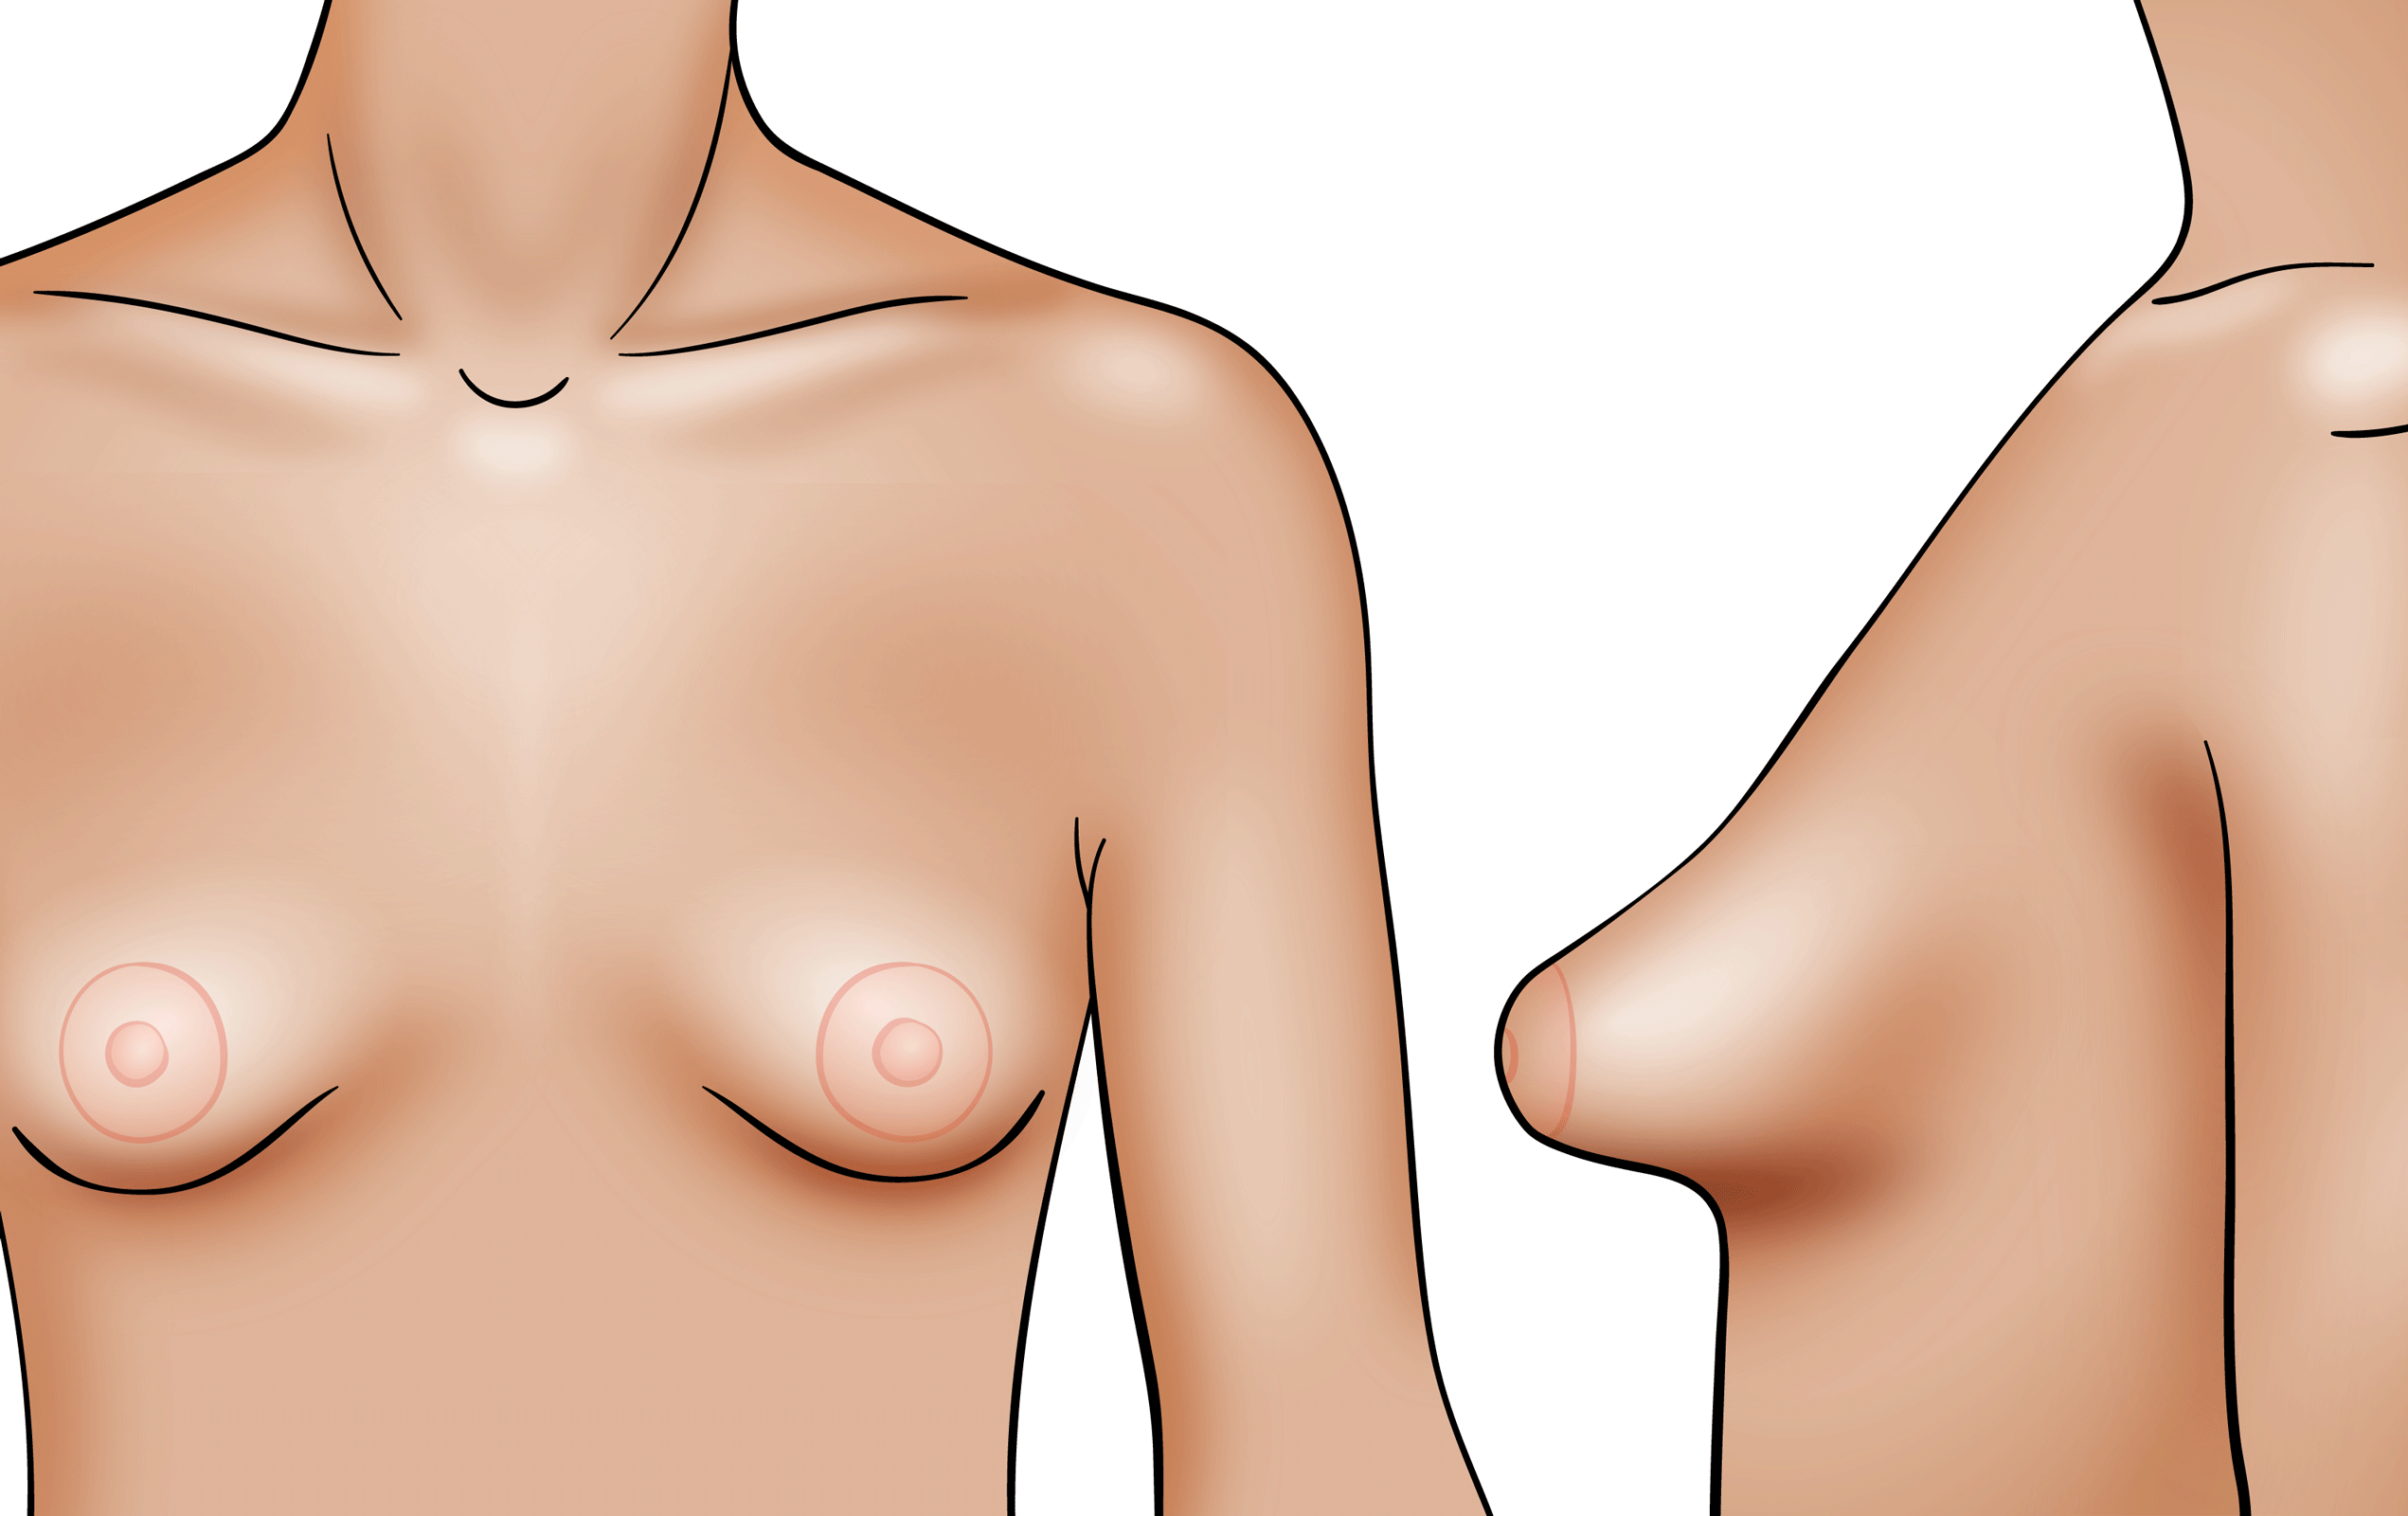 How to Fix Underdeveloped Breasts